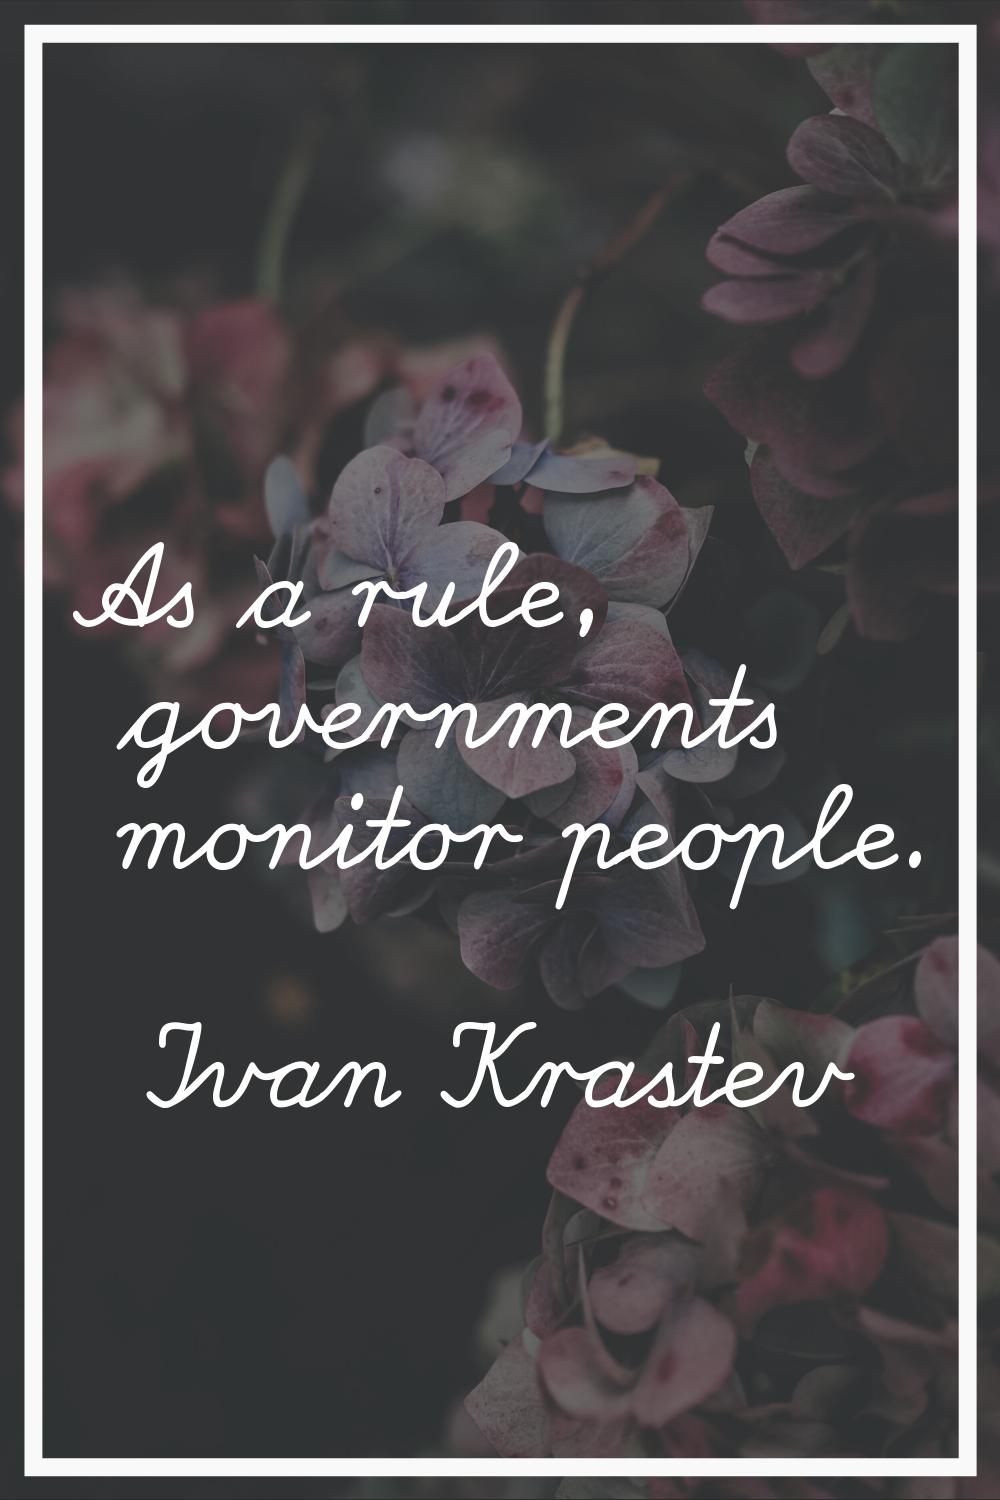 As a rule, governments monitor people.